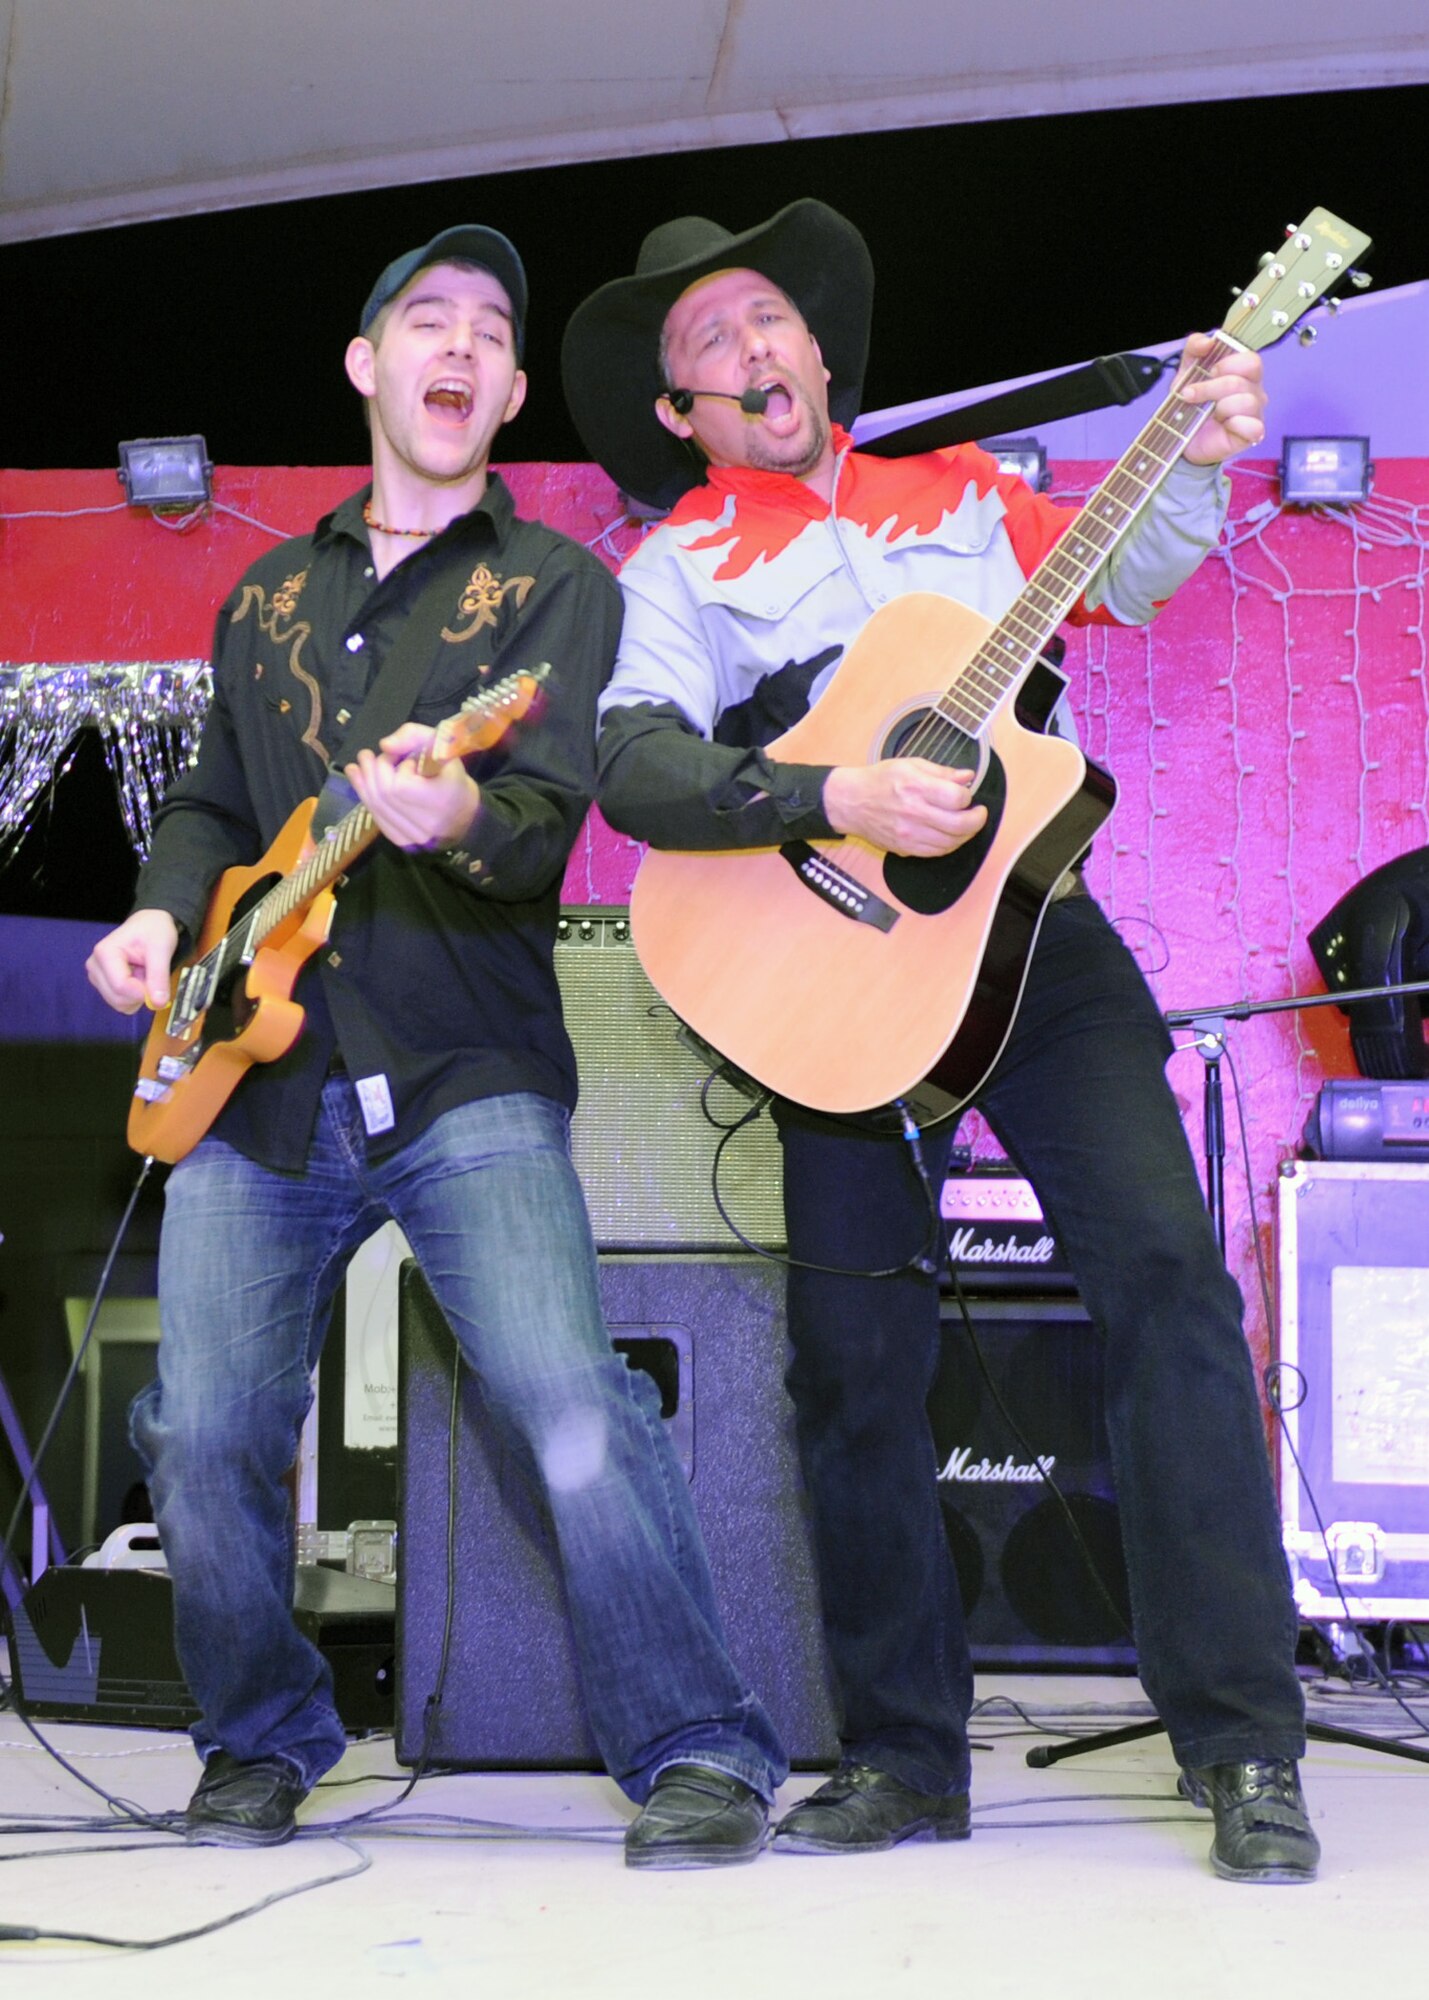 SOUTHWEST ASIA – A Garth Brooks cover band performed for U.S. and coalition forces at a New Year’s Eve celebration here. Other cover bands featured music by Katie Perry, Lady Gaga and Bon Jovi. (U.S. Air Force photo/Senior Airman Joel Mease)